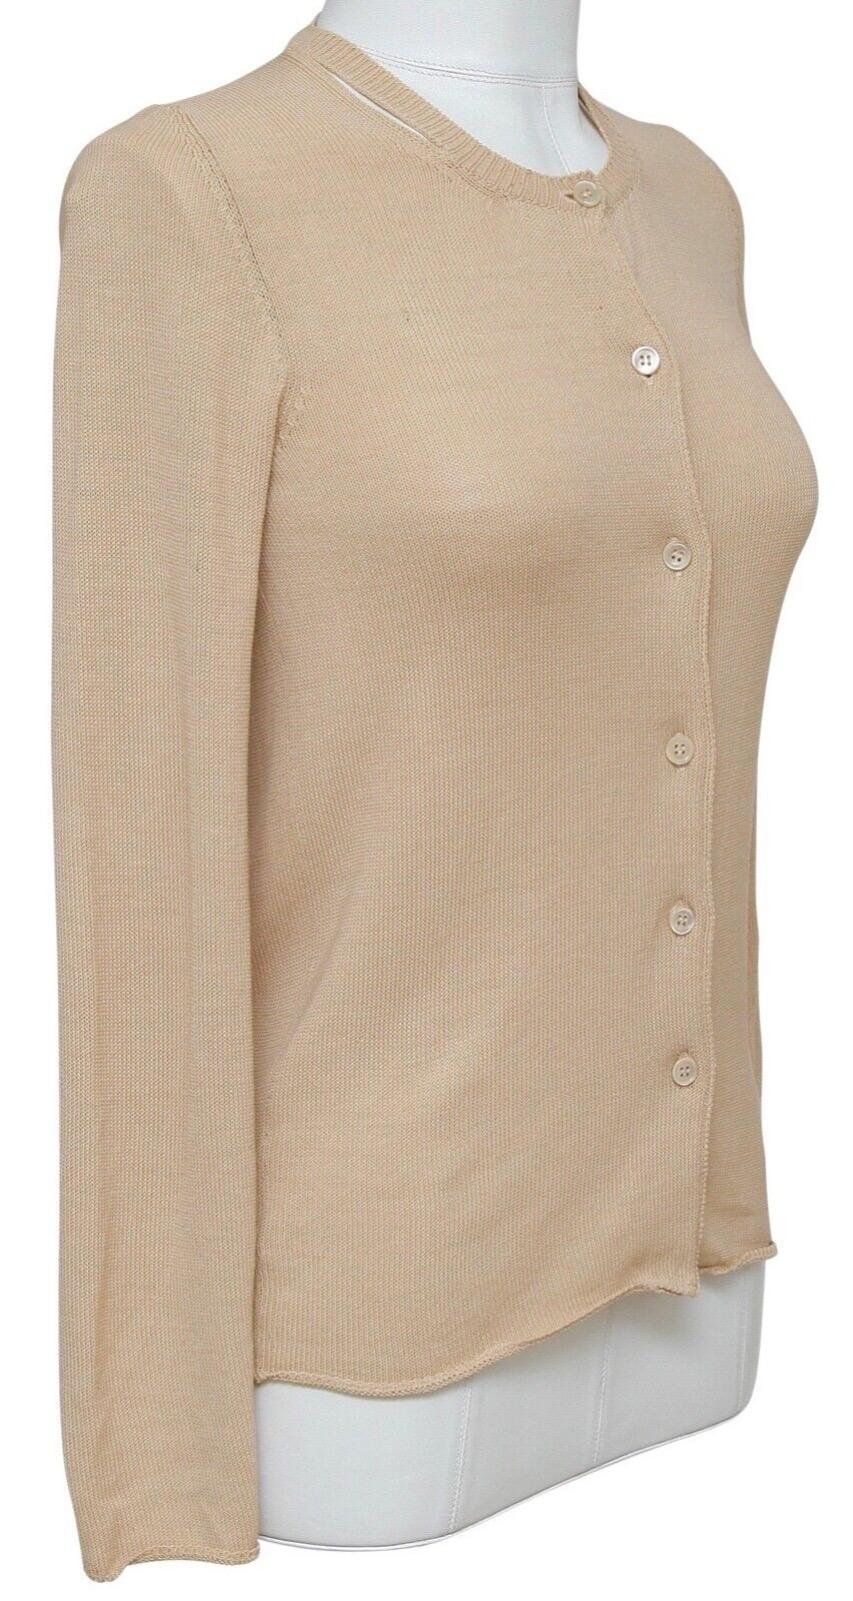 GUARANTEED AUTHENTIC LOVELY MARNI BEIGE LONG SLEEVE CARDIGAN

Details:
- Lightweight beige color cardigan has a great easy fit.
- Long sleeve.
- Crewneck with cutout detail.
- Front button closure.
- Easy and year round great piece for your Marni